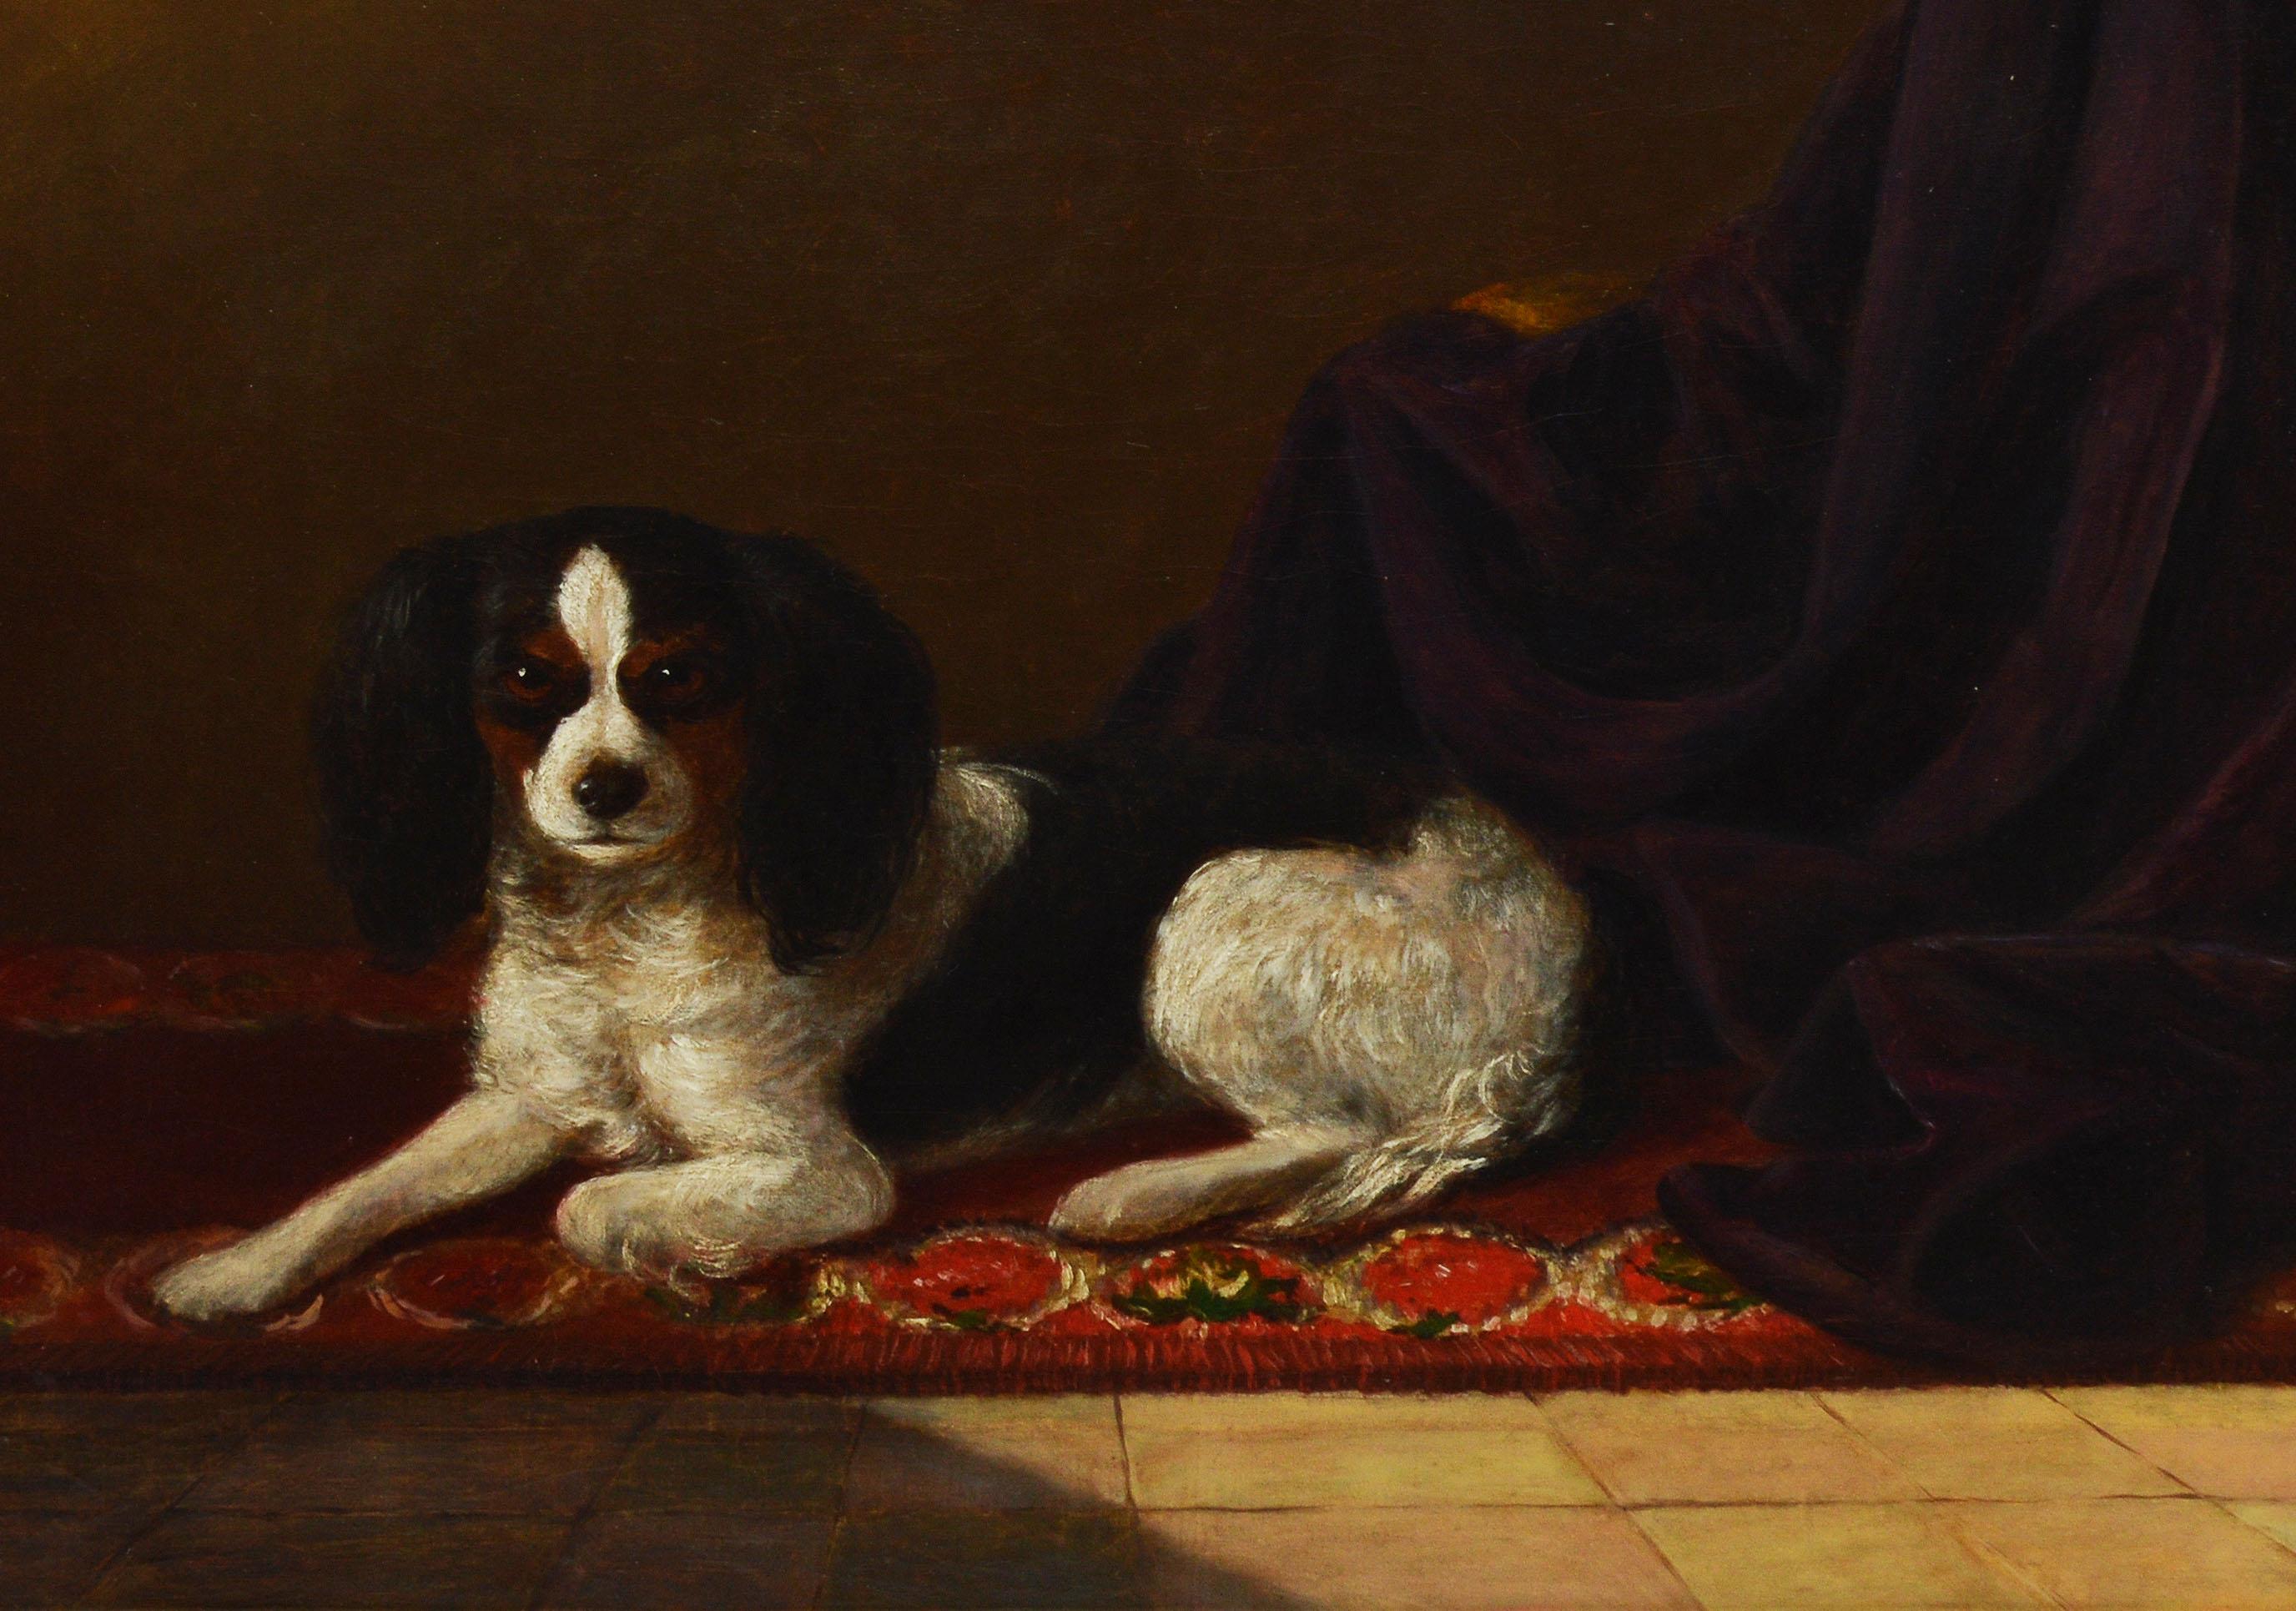 English portrait of a Spaniel by Thomas Grimshaw  (1817 - 1875).  Oil on canvas, circa 1850.  Signed lower left.  Displayed in a period giltwood frame.  